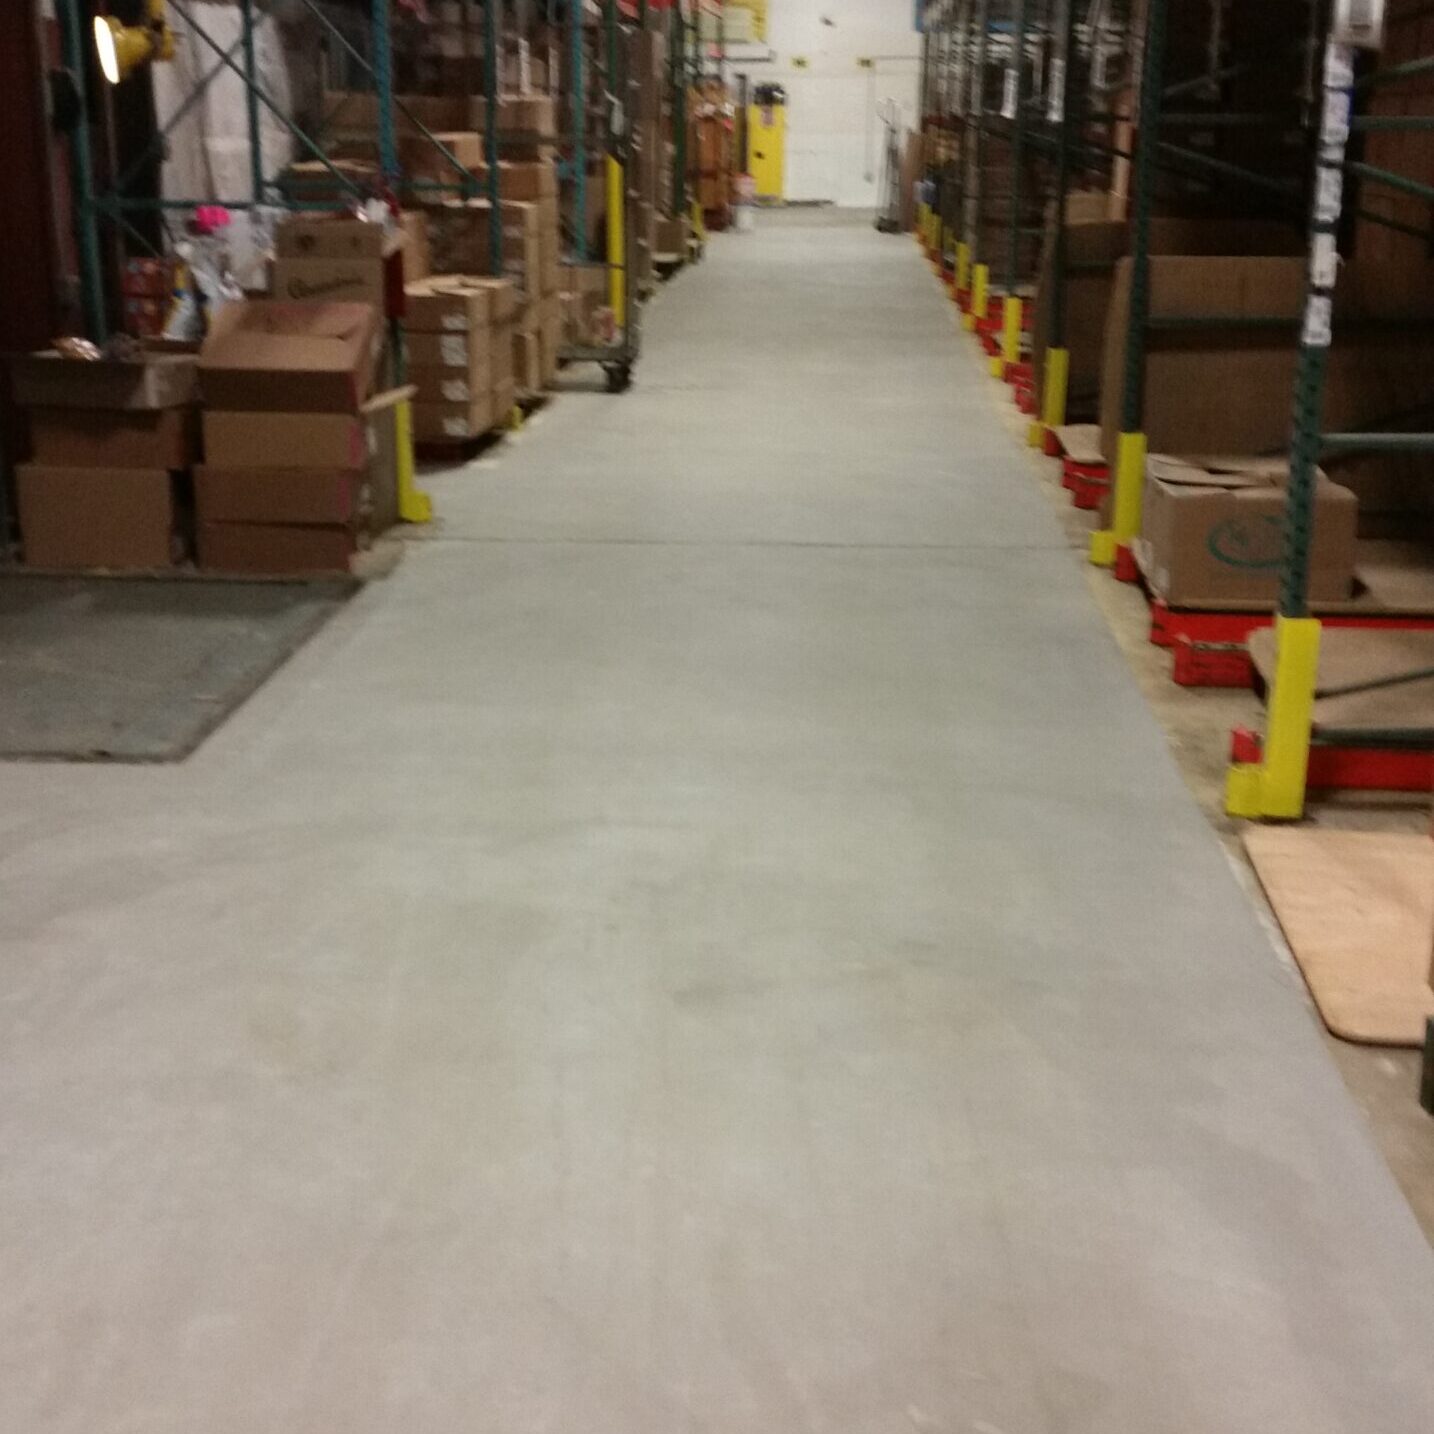 Warehouse Flooring Concepts in Concrete